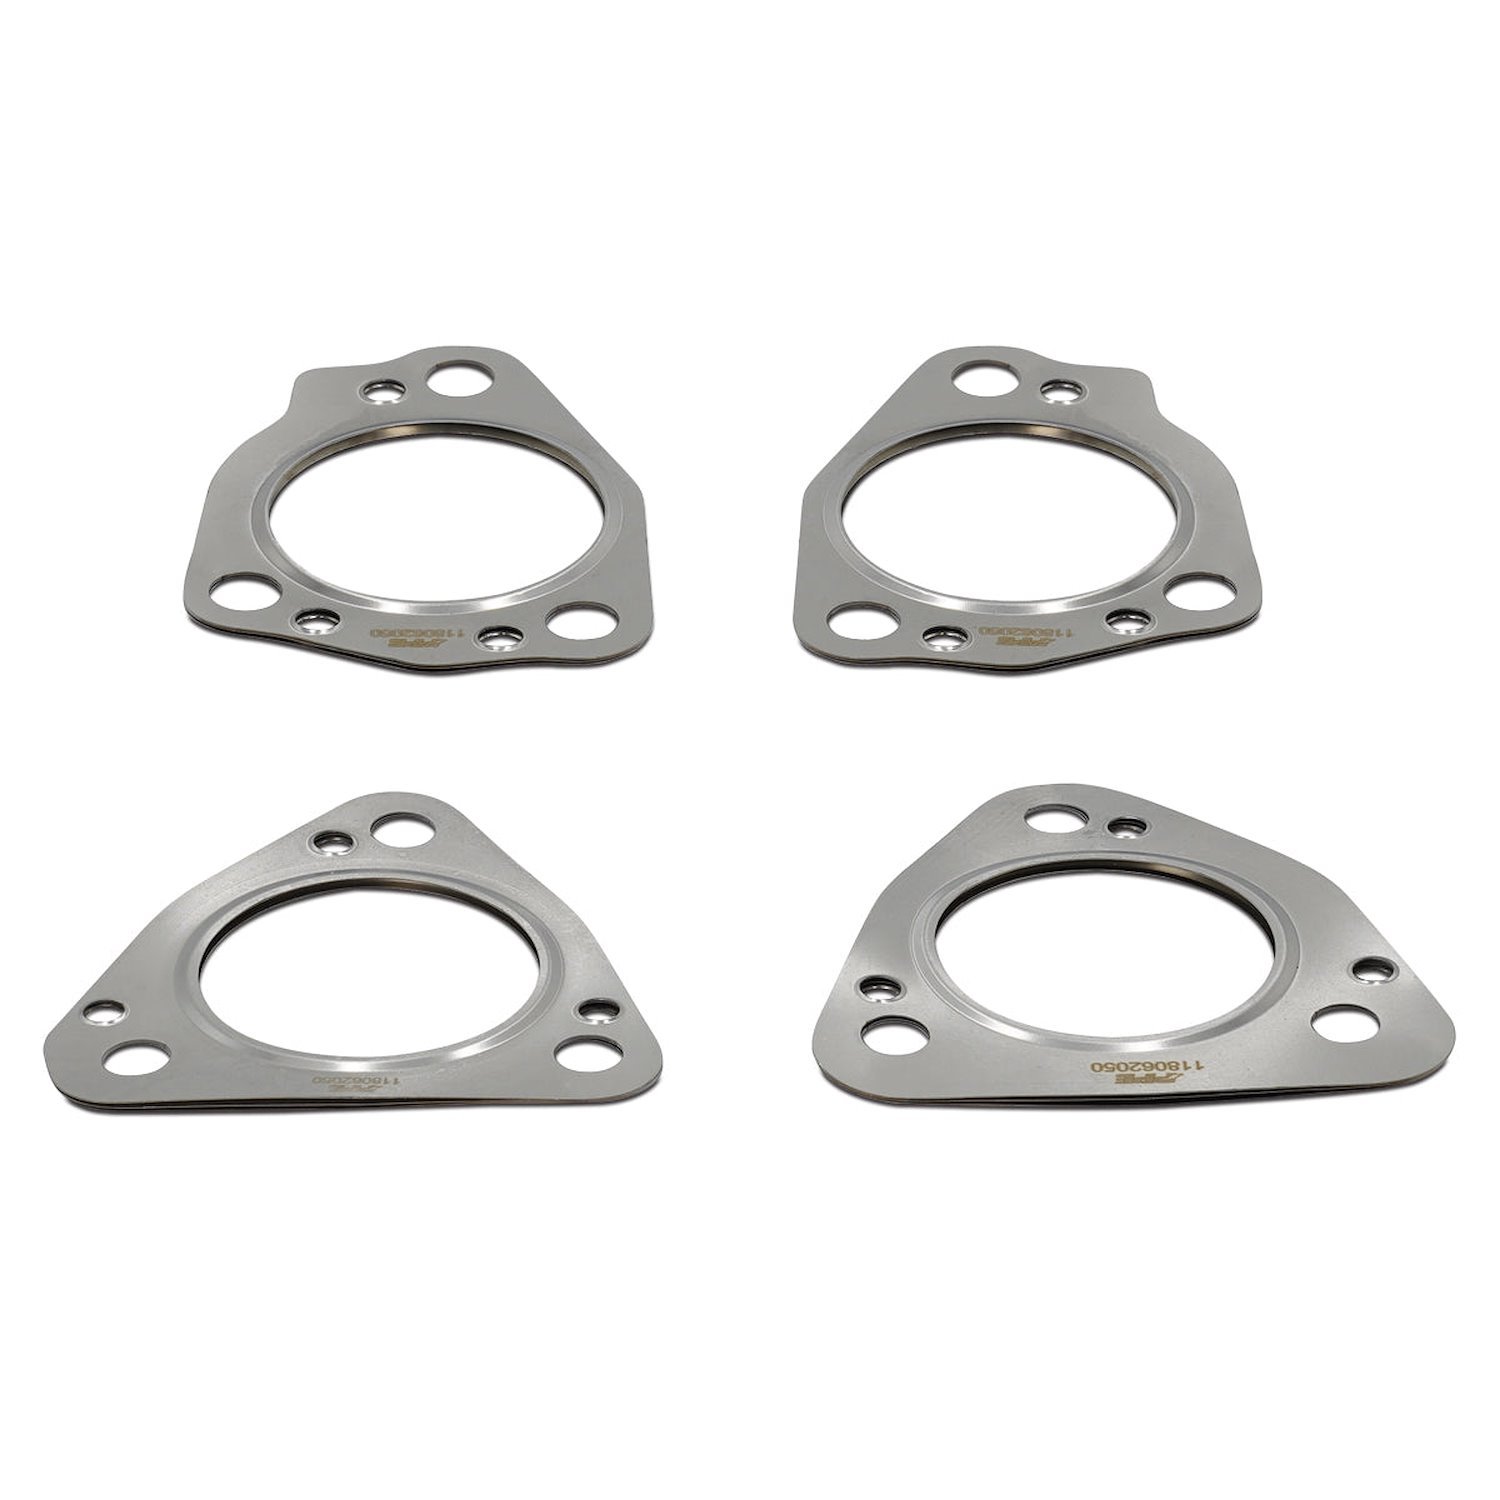 118062050 Stainless-Steel Gasket Set for Duramax L5P Up-Pipes (4 pcs)